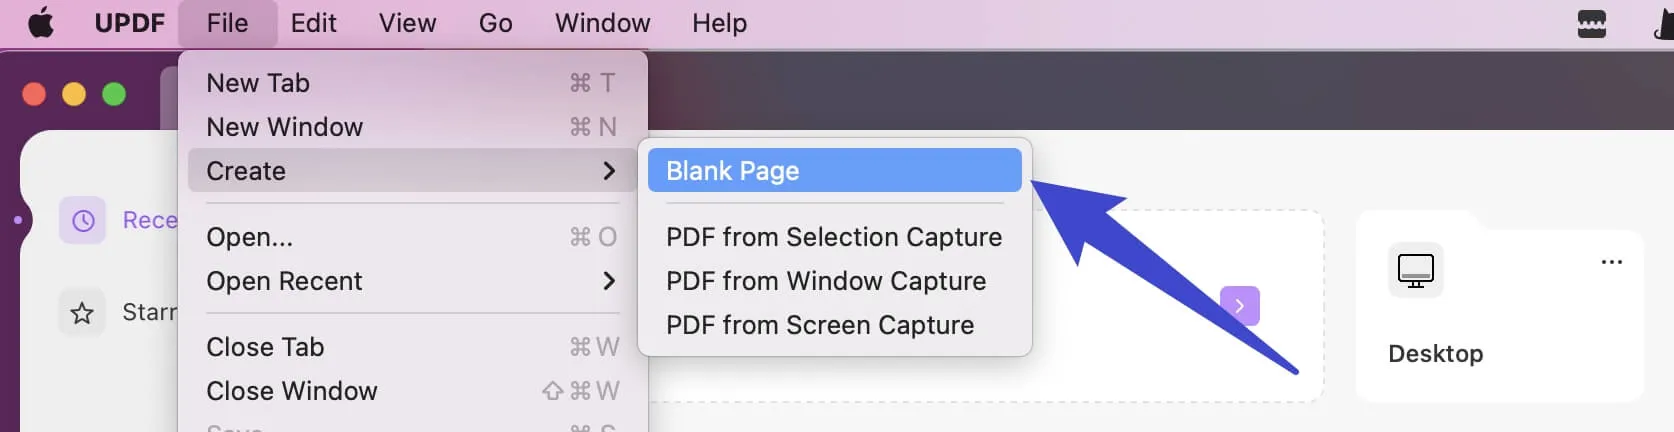 how to create a fillable pdf